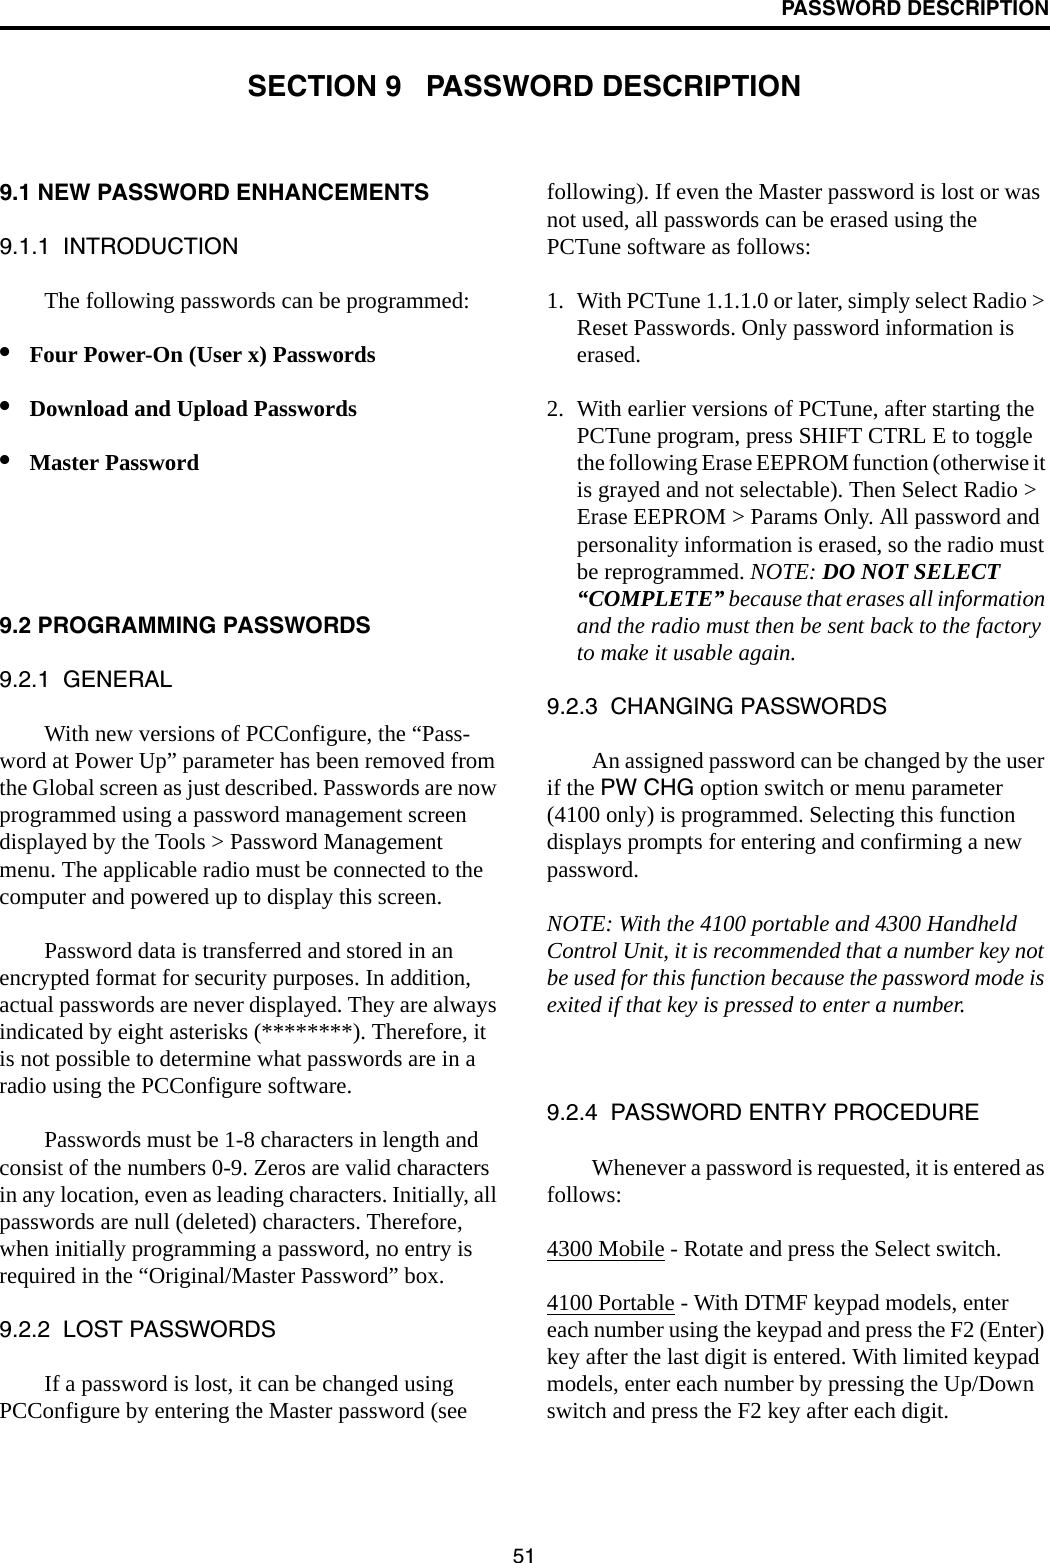 51PASSWORD DESCRIPTIONSECTION 9   PASSWORD DESCRIPTION9.1 NEW PASSWORD ENHANCEMENTS9.1.1  INTRODUCTIONThe following passwords can be programmed: •Four Power-On (User x) Passwords •Download and Upload Passwords•Master Password9.2 PROGRAMMING PASSWORDS9.2.1  GENERALWith new versions of PCConfigure, the “Pass-word at Power Up” parameter has been removed from the Global screen as just described. Passwords are now programmed using a password management screen displayed by the Tools &gt; Password Management menu. The applicable radio must be connected to the computer and powered up to display this screen. Password data is transferred and stored in an encrypted format for security purposes. In addition, actual passwords are never displayed. They are always indicated by eight asterisks (********). Therefore, it is not possible to determine what passwords are in a radio using the PCConfigure software.Passwords must be 1-8 characters in length and consist of the numbers 0-9. Zeros are valid characters in any location, even as leading characters. Initially, all passwords are null (deleted) characters. Therefore, when initially programming a password, no entry is required in the “Original/Master Password” box.9.2.2  LOST PASSWORDSIf a password is lost, it can be changed using PCConfigure by entering the Master password (see following). If even the Master password is lost or was not used, all passwords can be erased using the PCTune software as follows:1. With PCTune 1.1.1.0 or later, simply select Radio &gt; Reset Passwords. Only password information is erased. 2. With earlier versions of PCTune, after starting the PCTune program, press SHIFT CTRL E to toggle the following Erase EEPROM function (otherwise it is grayed and not selectable). Then Select Radio &gt; Erase EEPROM &gt; Params Only. All password and personality information is erased, so the radio must be reprogrammed. NOTE: DO NOT SELECT “COMPLETE” because that erases all information and the radio must then be sent back to the factory to make it usable again.9.2.3  CHANGING PASSWORDSAn assigned password can be changed by the user if the PW CHG option switch or menu parameter (4100 only) is programmed. Selecting this function displays prompts for entering and confirming a new password. NOTE: With the 4100 portable and 4300 Handheld Control Unit, it is recommended that a number key not be used for this function because the password mode is exited if that key is pressed to enter a number.9.2.4  PASSWORD ENTRY PROCEDUREWhenever a password is requested, it is entered as follows:4300 Mobile - Rotate and press the Select switch.4100 Portable - With DTMF keypad models, enter each number using the keypad and press the F2 (Enter) key after the last digit is entered. With limited keypad models, enter each number by pressing the Up/Down switch and press the F2 key after each digit.